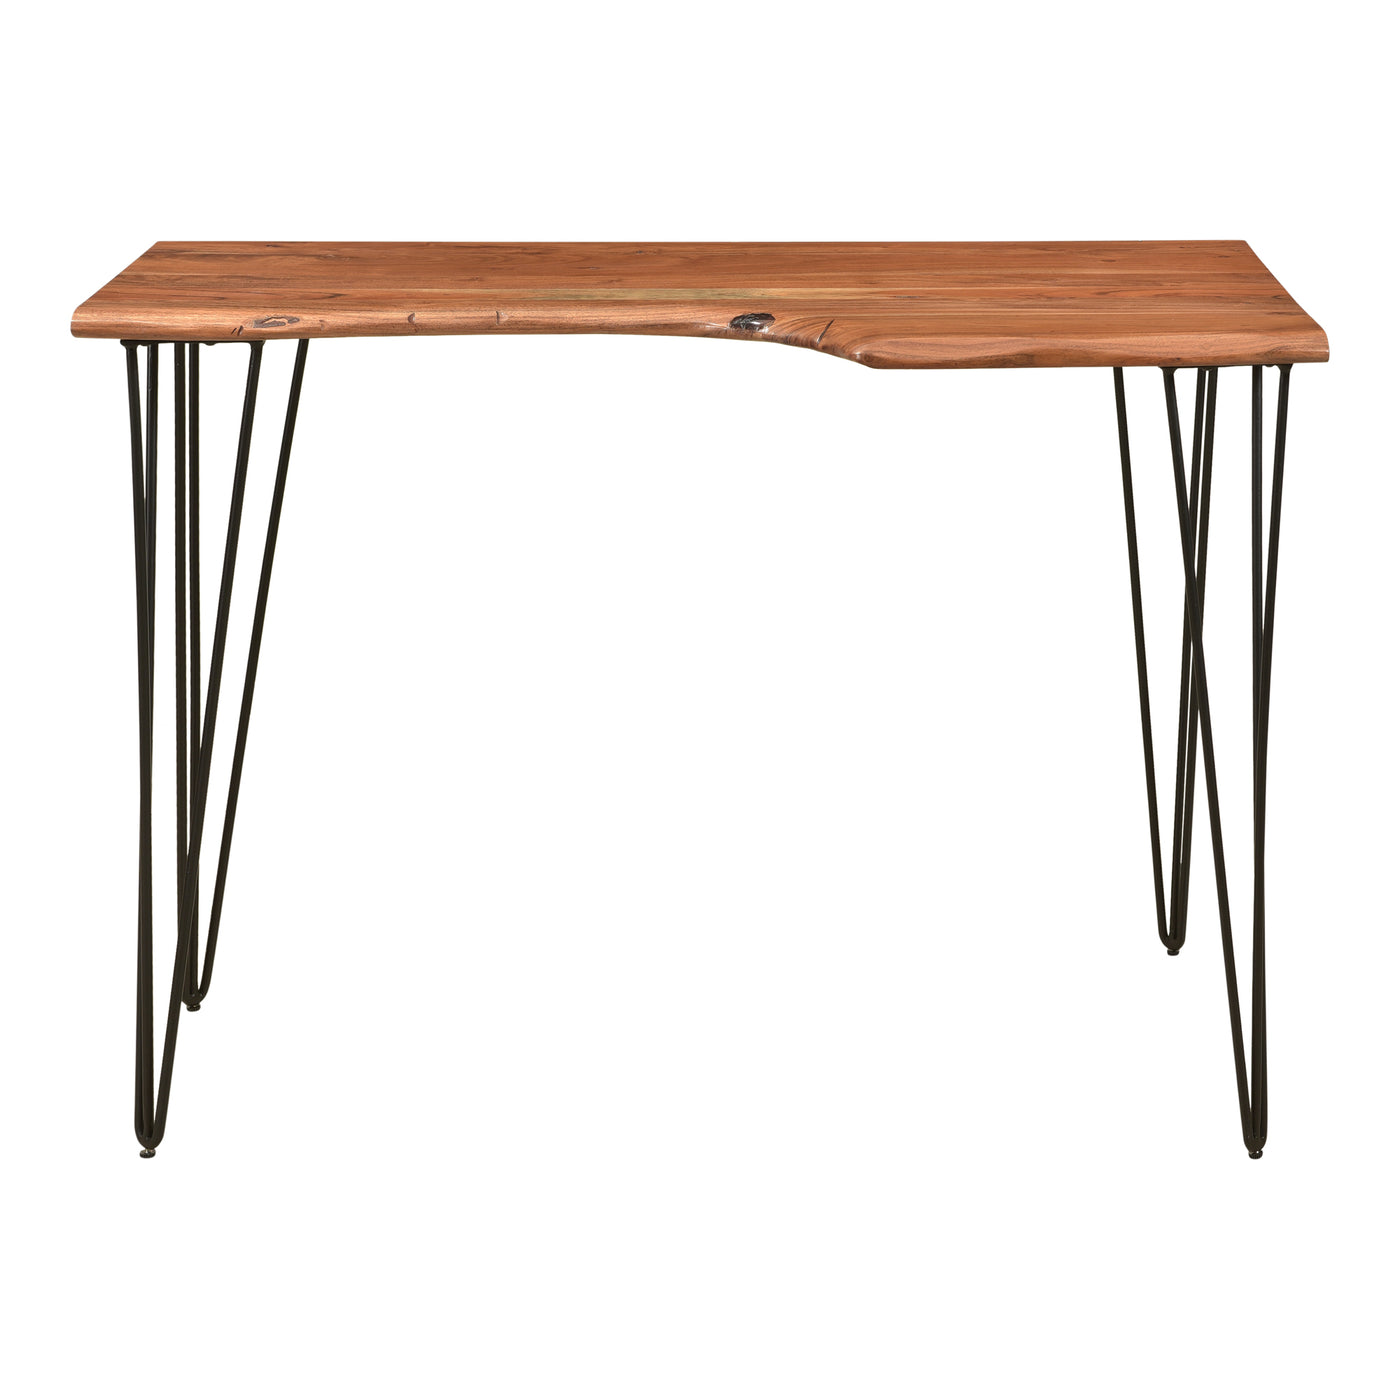 Bring organic, natural beauty into the office. The Luka desk features a stunning, sculpted tabletop made from solid acacia...